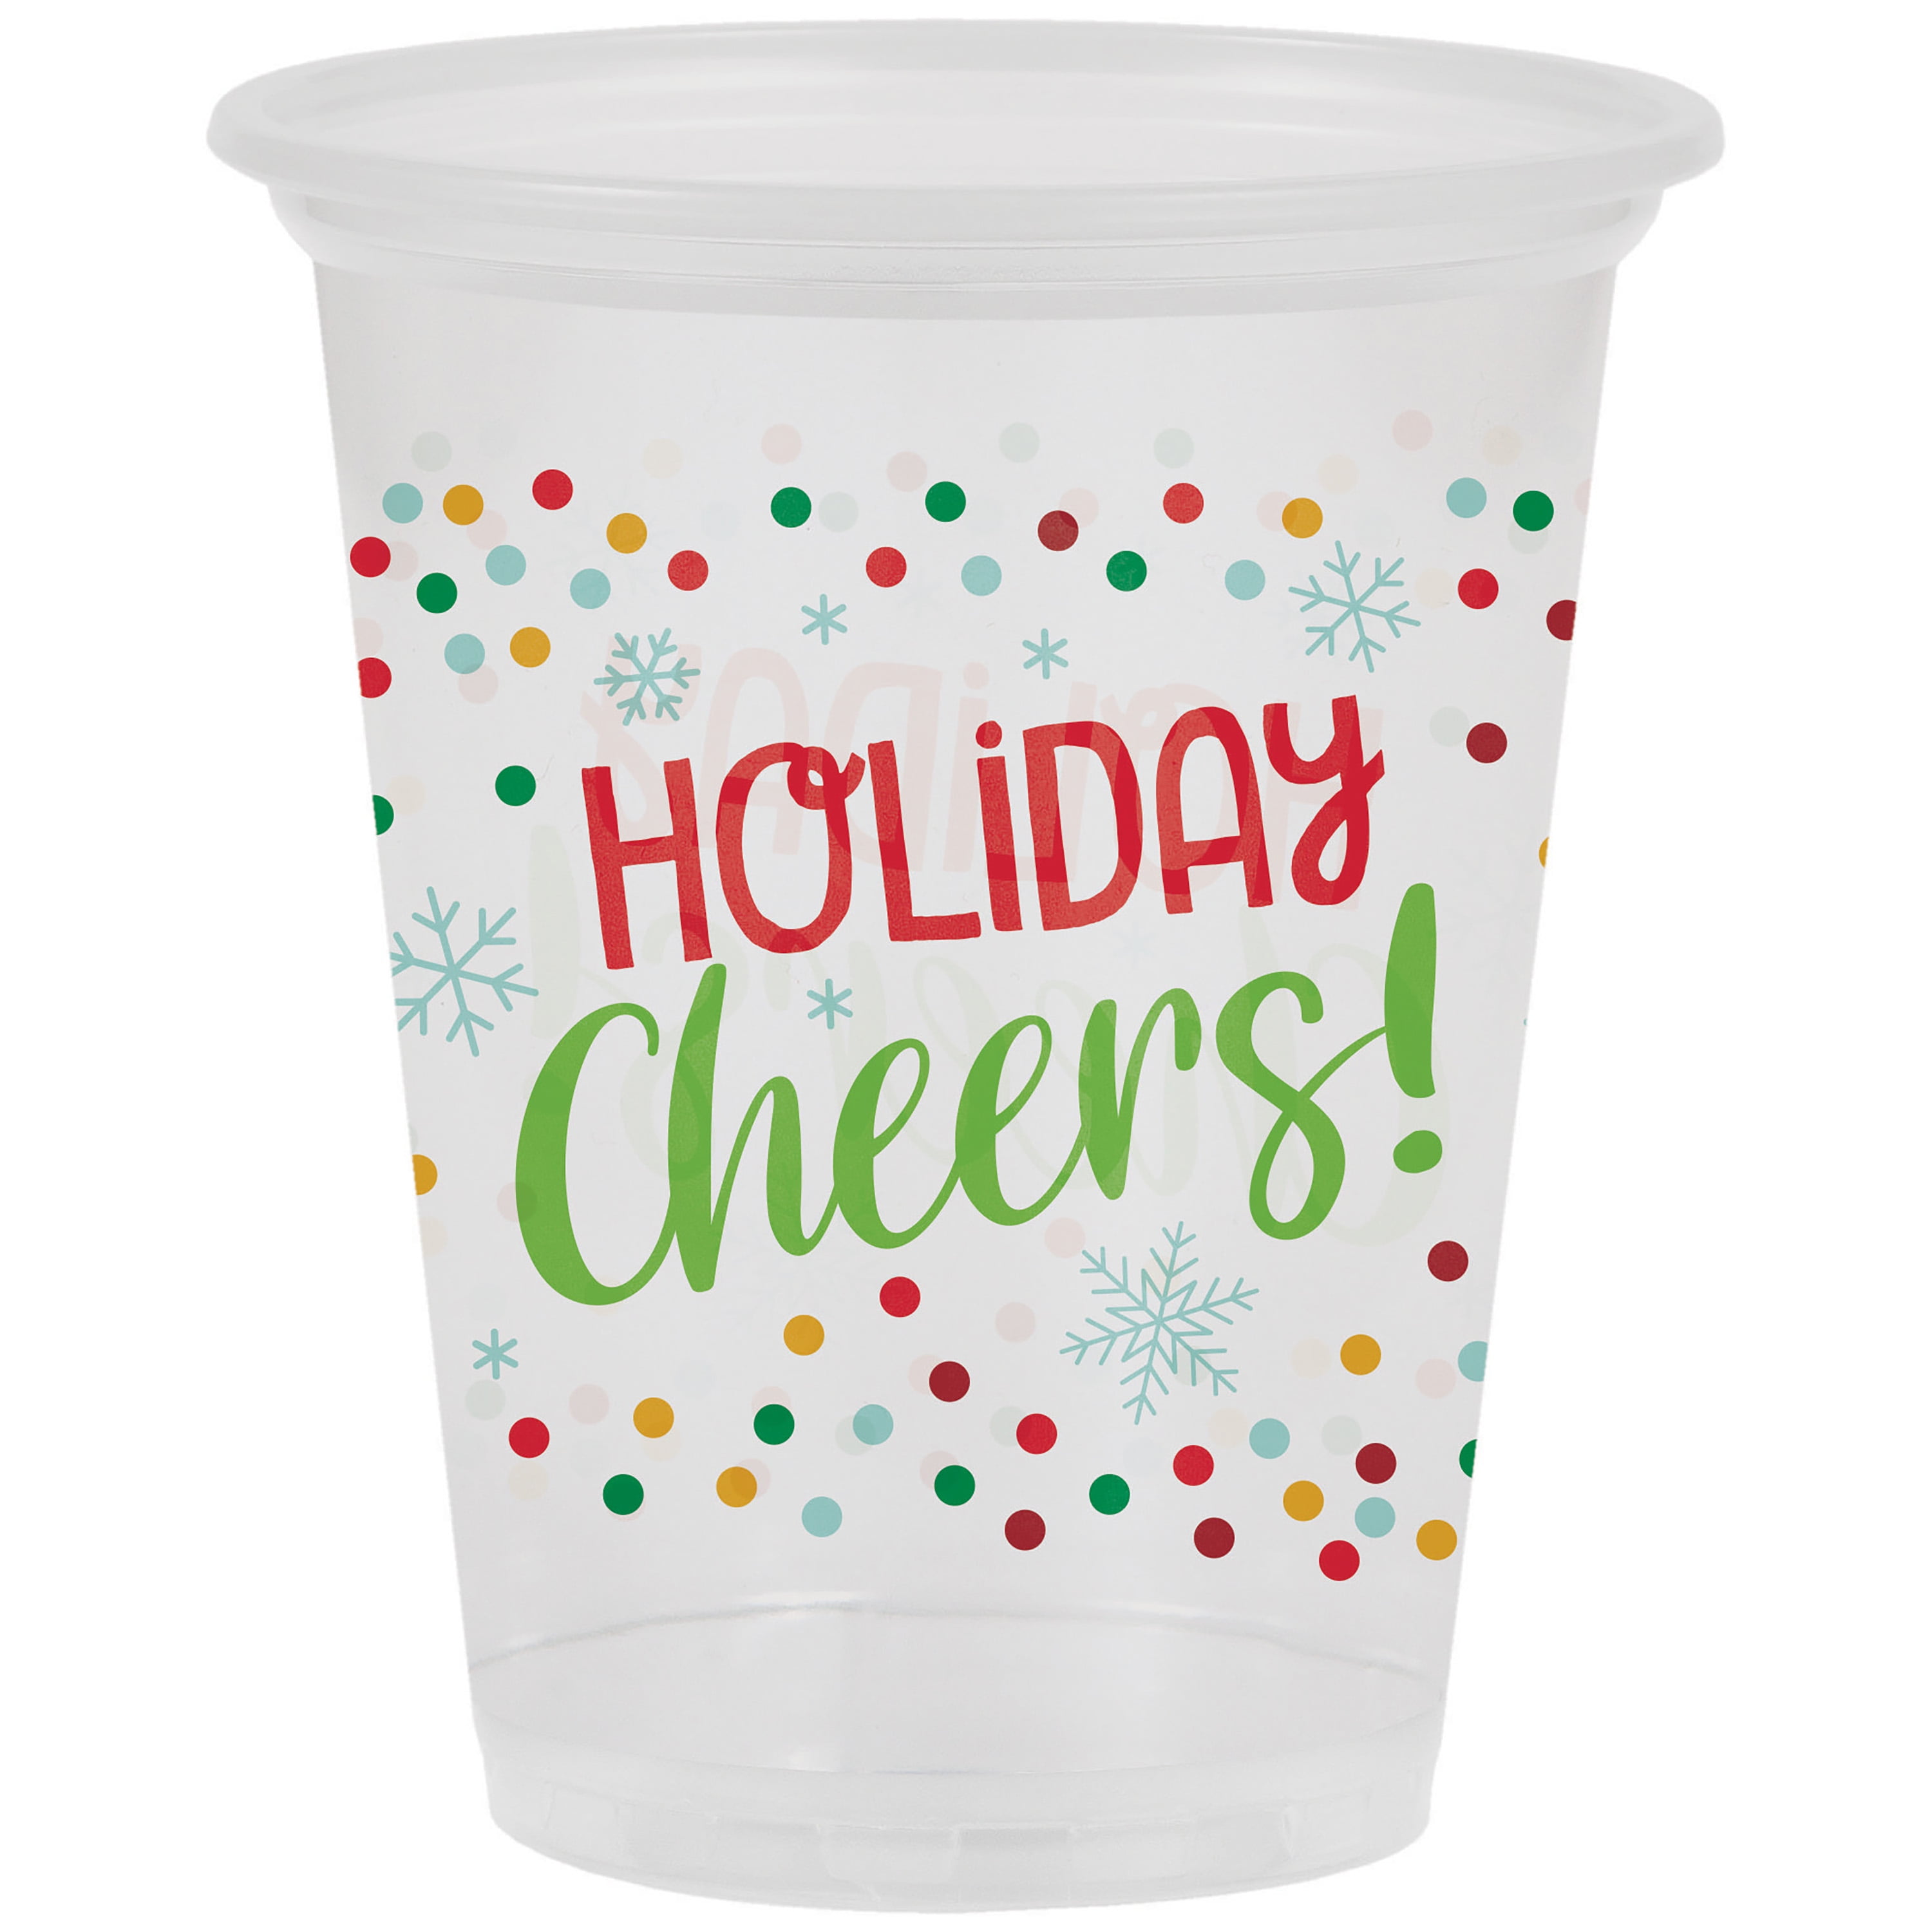 Sliner 24 Pack Christmas Plastic Cups 16oz Reusable Clear Plastic Christmas  Cups Wish You A Merry Ch…See more Sliner 24 Pack Christmas Plastic Cups